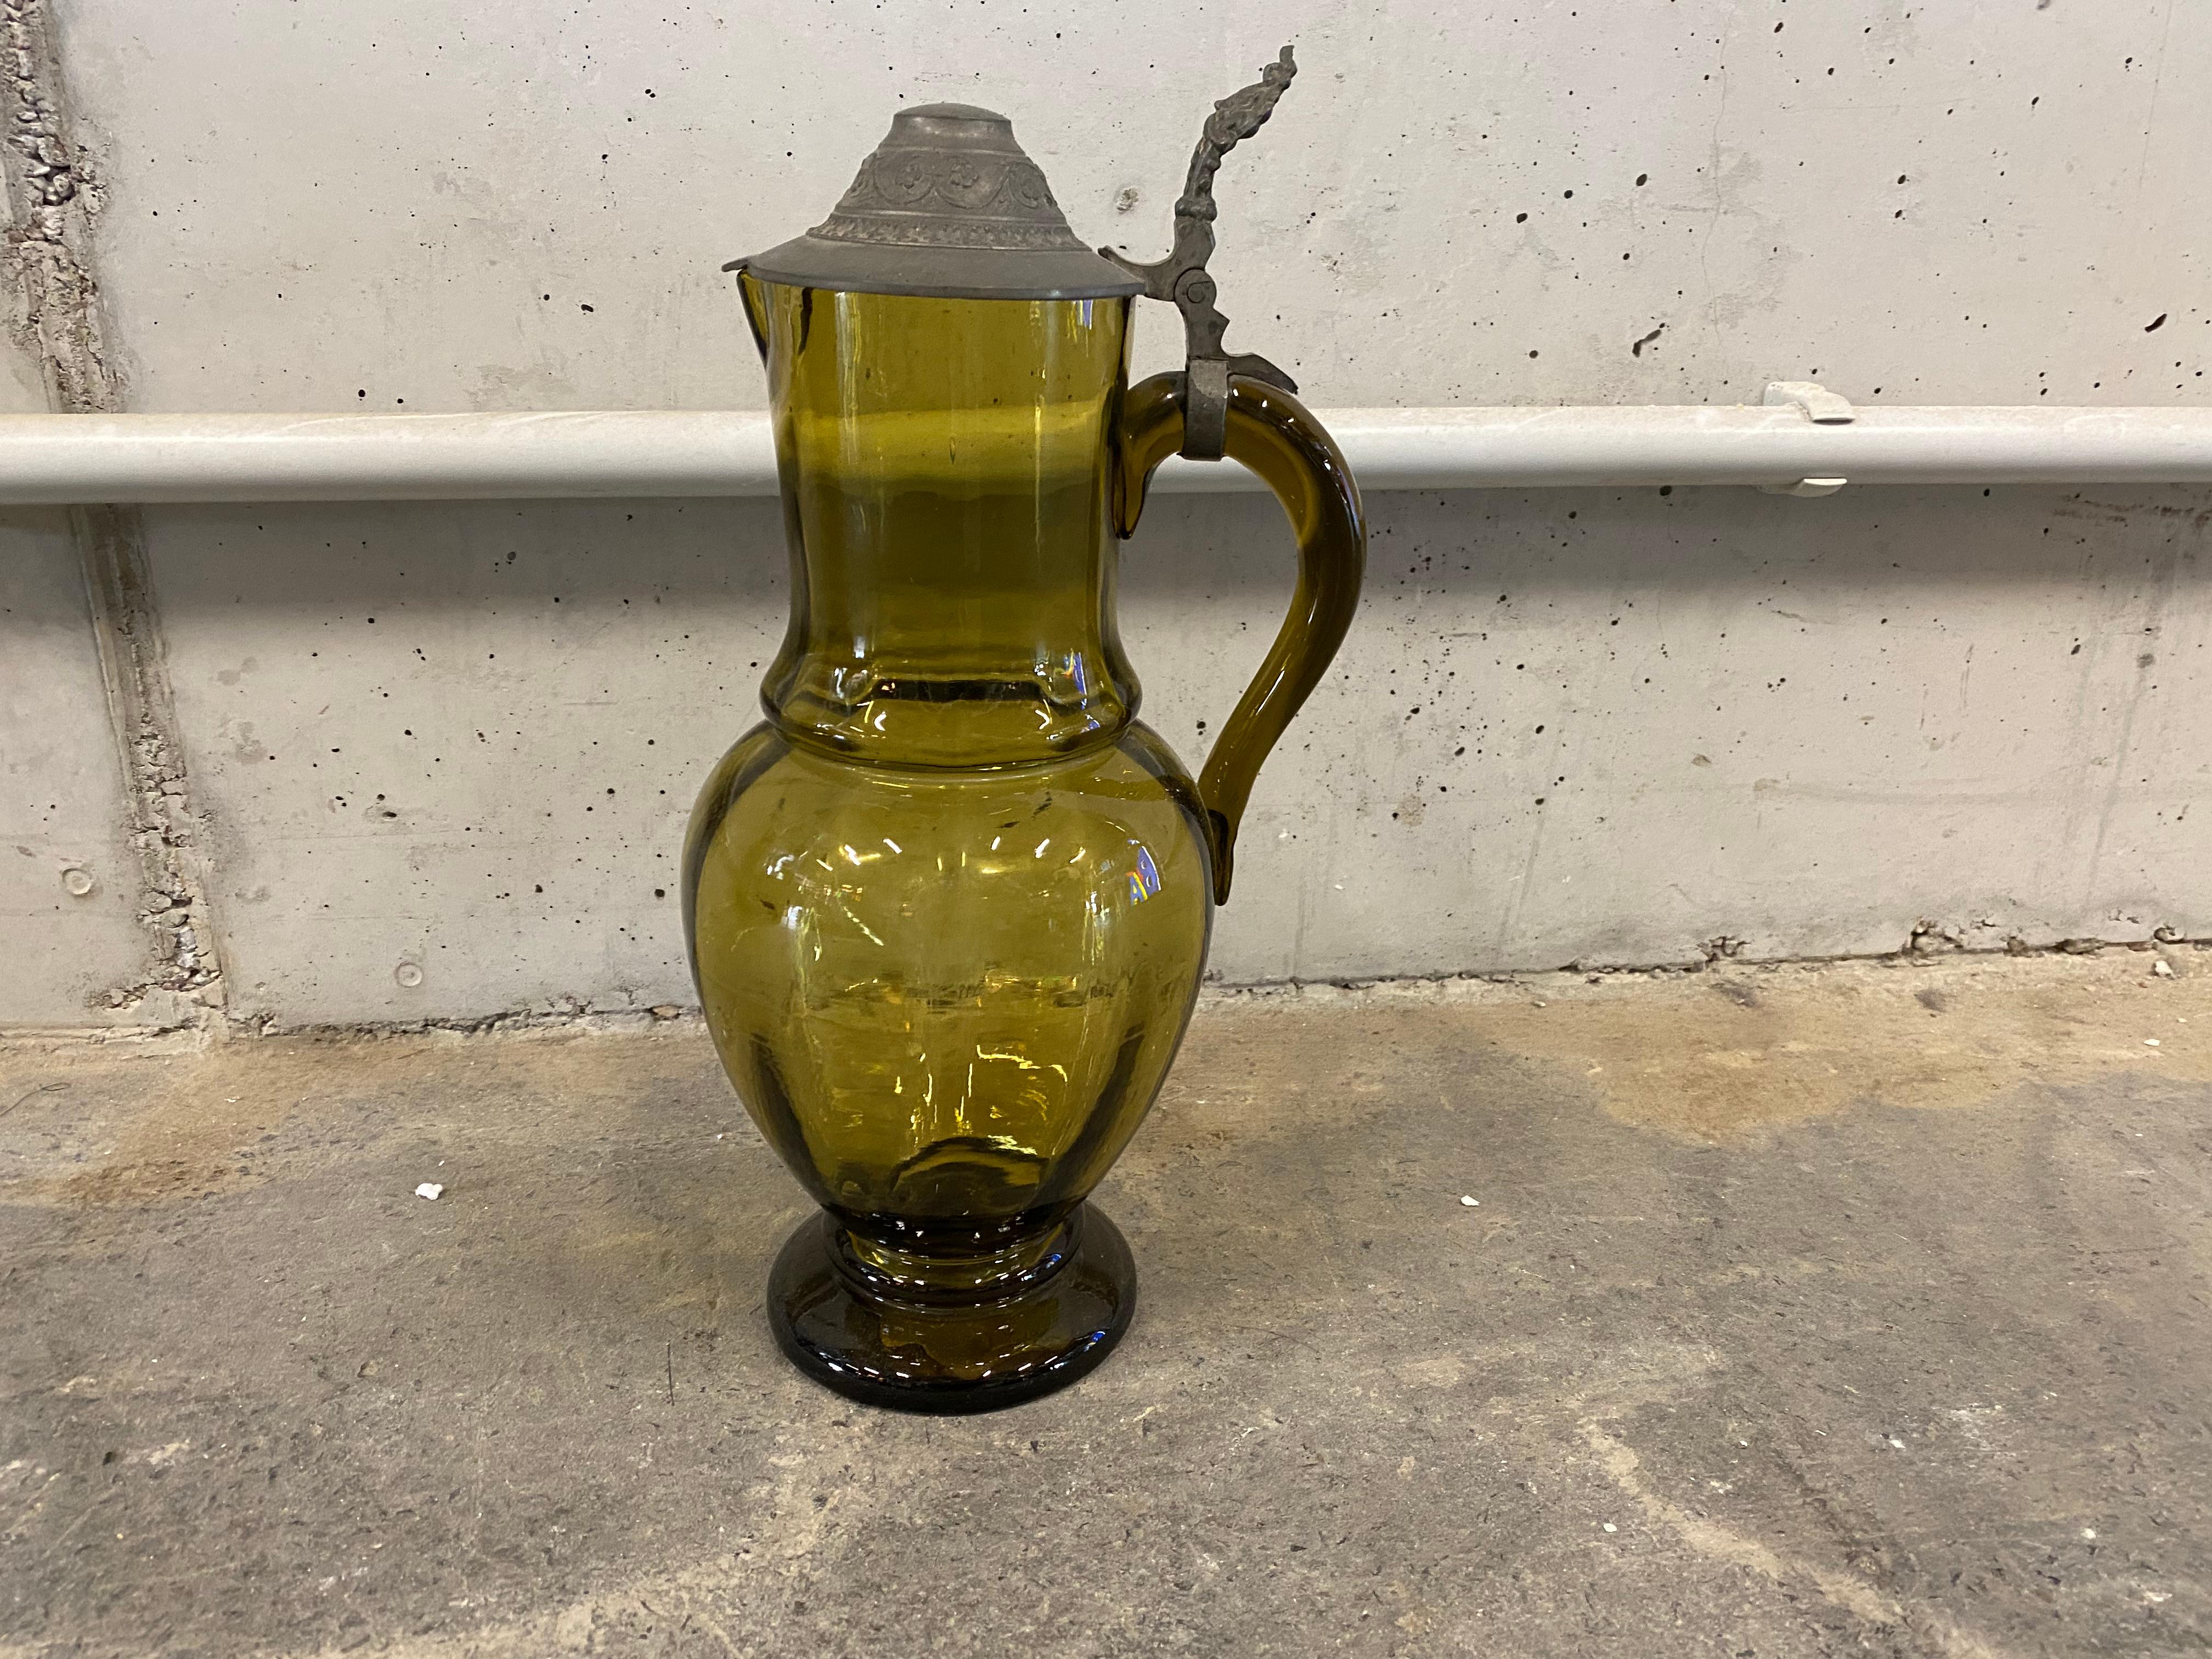 Glass jug with lid from the years around 1890. This beautiful mouth-blown jug made of olive green stained glass and lid made of tin is marked and belongs to the historicism. The ornate lid is attached to the handle of the pitcher and can be opened